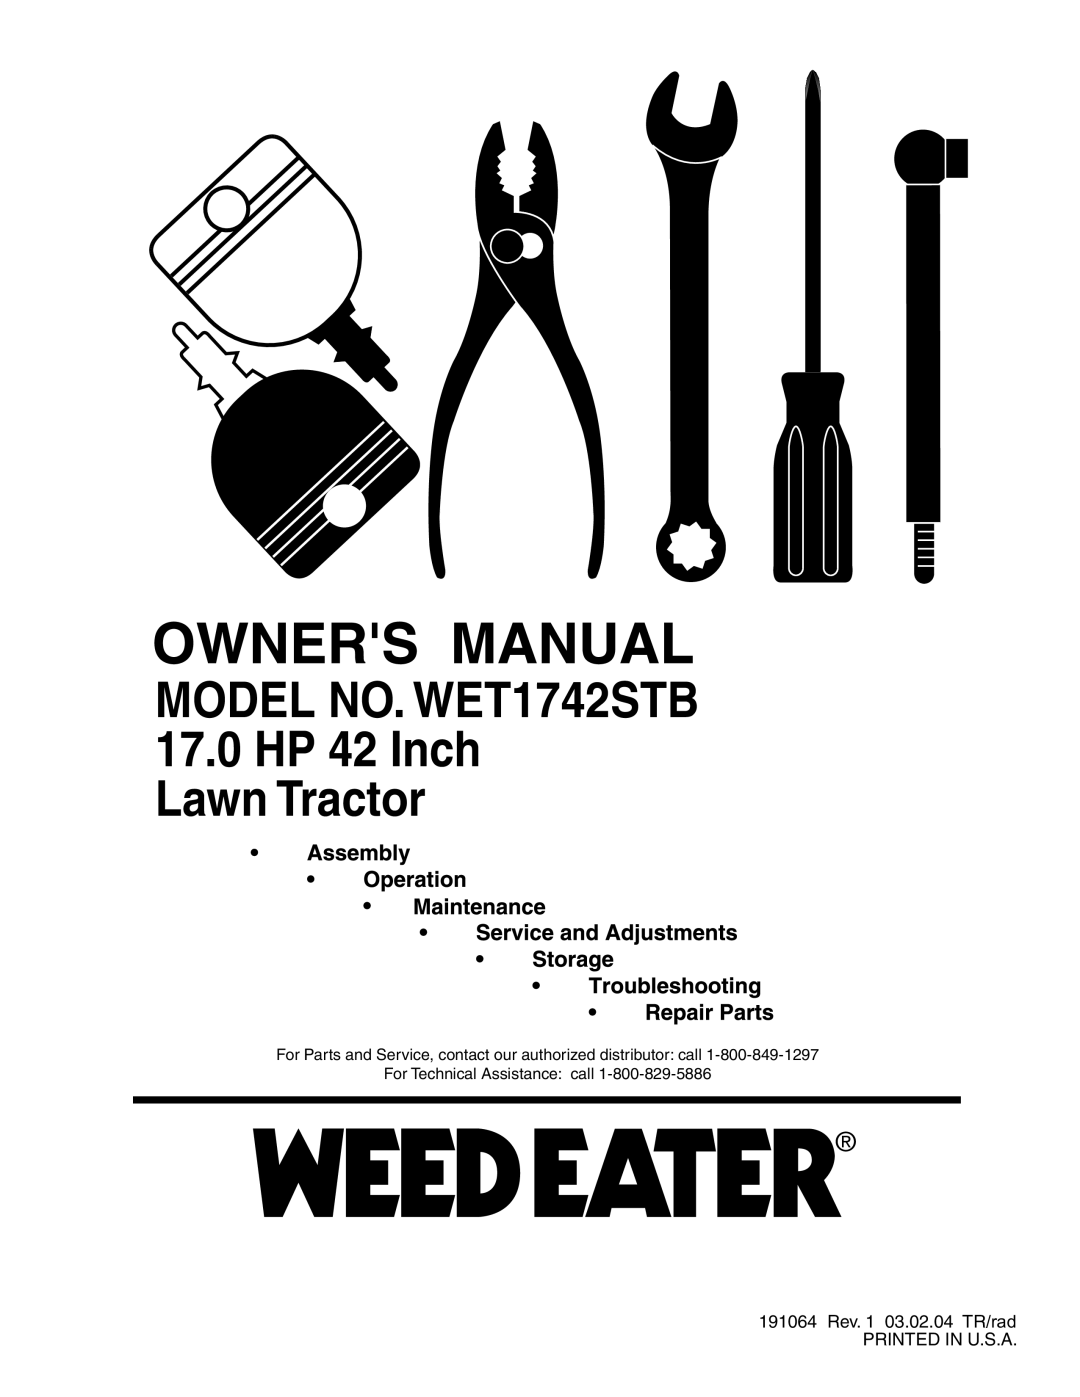 Weed Eater manual MODEL NO. WET1742STB 17.0 HP 42 Inch Lawn Tractor, 191064 Rev. 1 03.02.04 TR/rad PRINTED IN U.S.A 